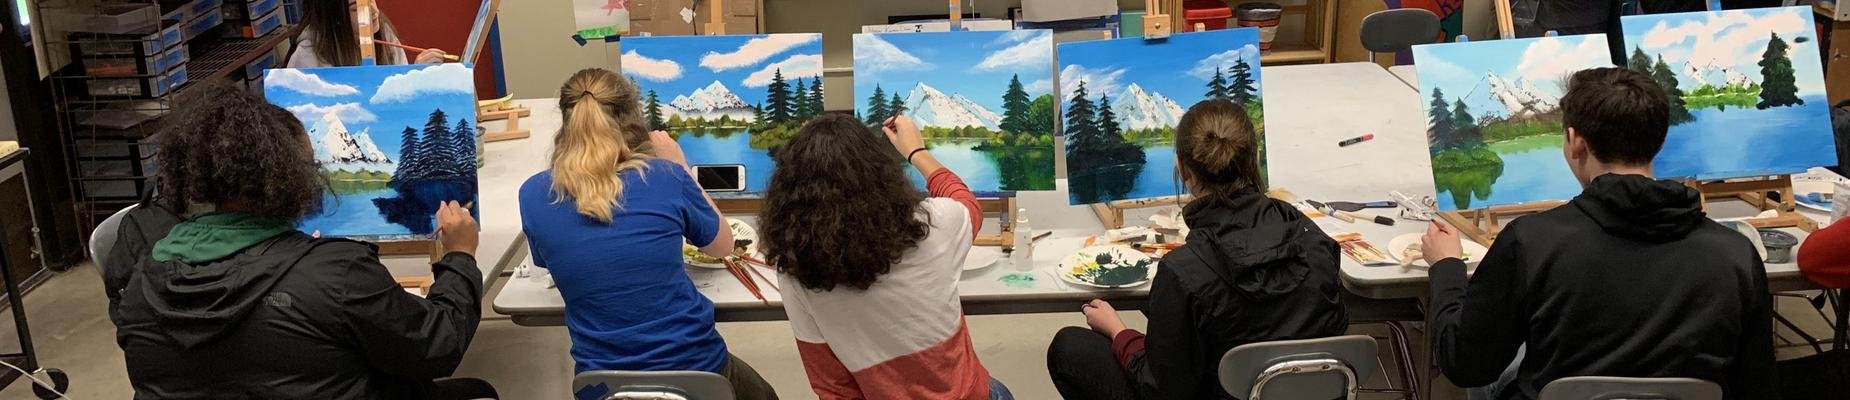 Students Painting